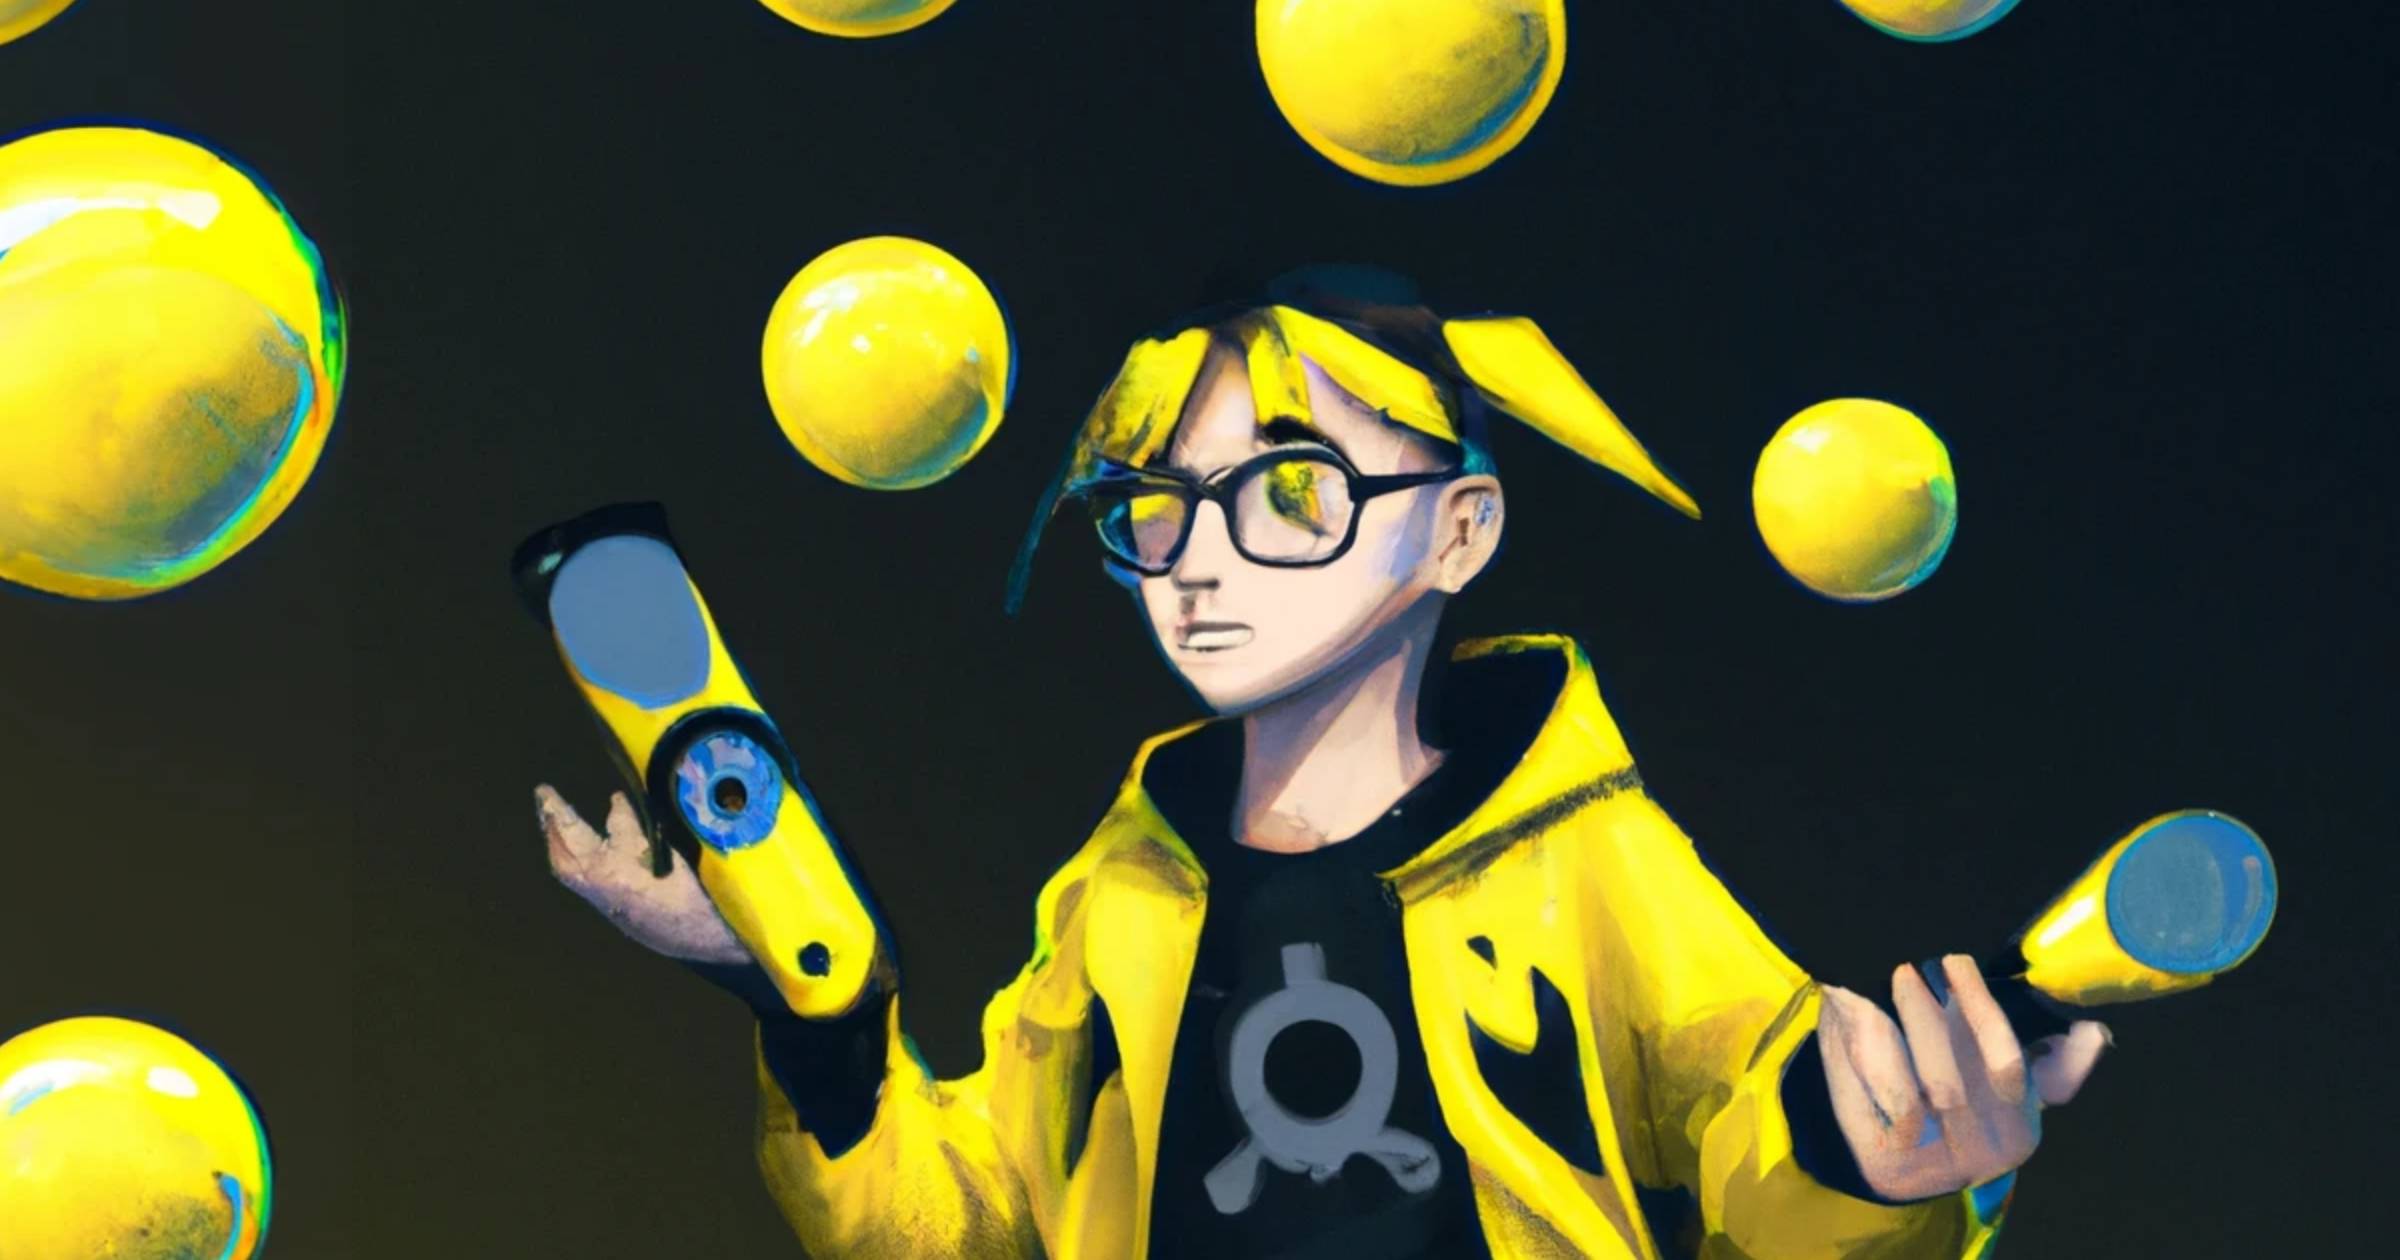 Girl In Yellow Outfit Juggling, Cyberpunk Style